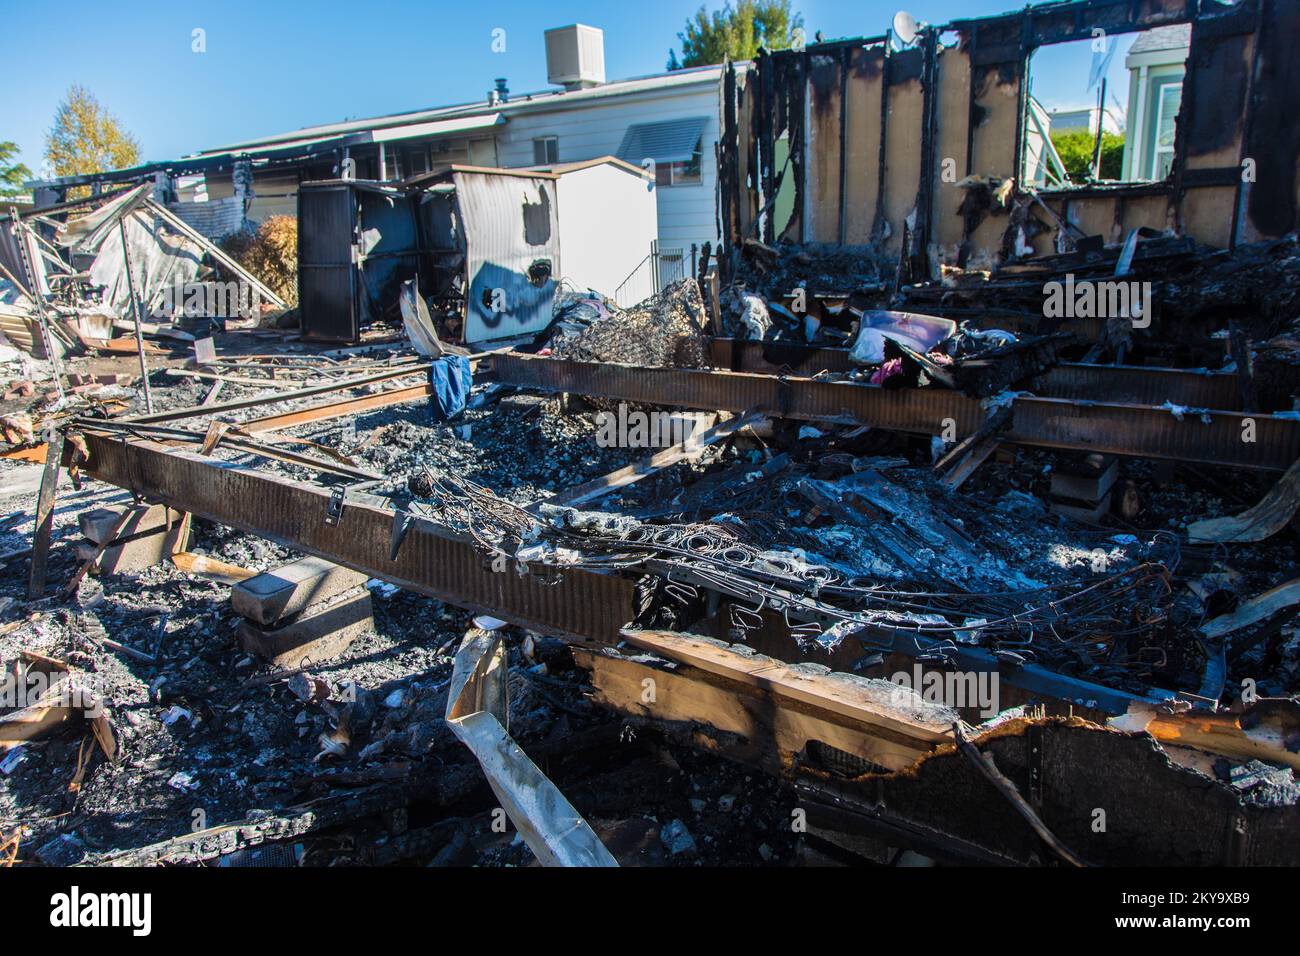 Napa, CA, August 30, 2014 ; Fire damage from broken gas lines at the Napa Valley Mobile Home Park in the City of Napa, California, which was struck by a 6.0 earthquake at 3:20 a.m. on August 24. 2014. At least 103 structures (44 homes, 59 businesses) were tagged by inspectors as unsafe to enter in the City of Napa after the earthquake. FEMA supports state, local and tribal governments in their efforts to recover from the effects of natural disasters.. Photographs Relating to Disasters and Emergency Management Programs, Activities, and Officials Stock Photo